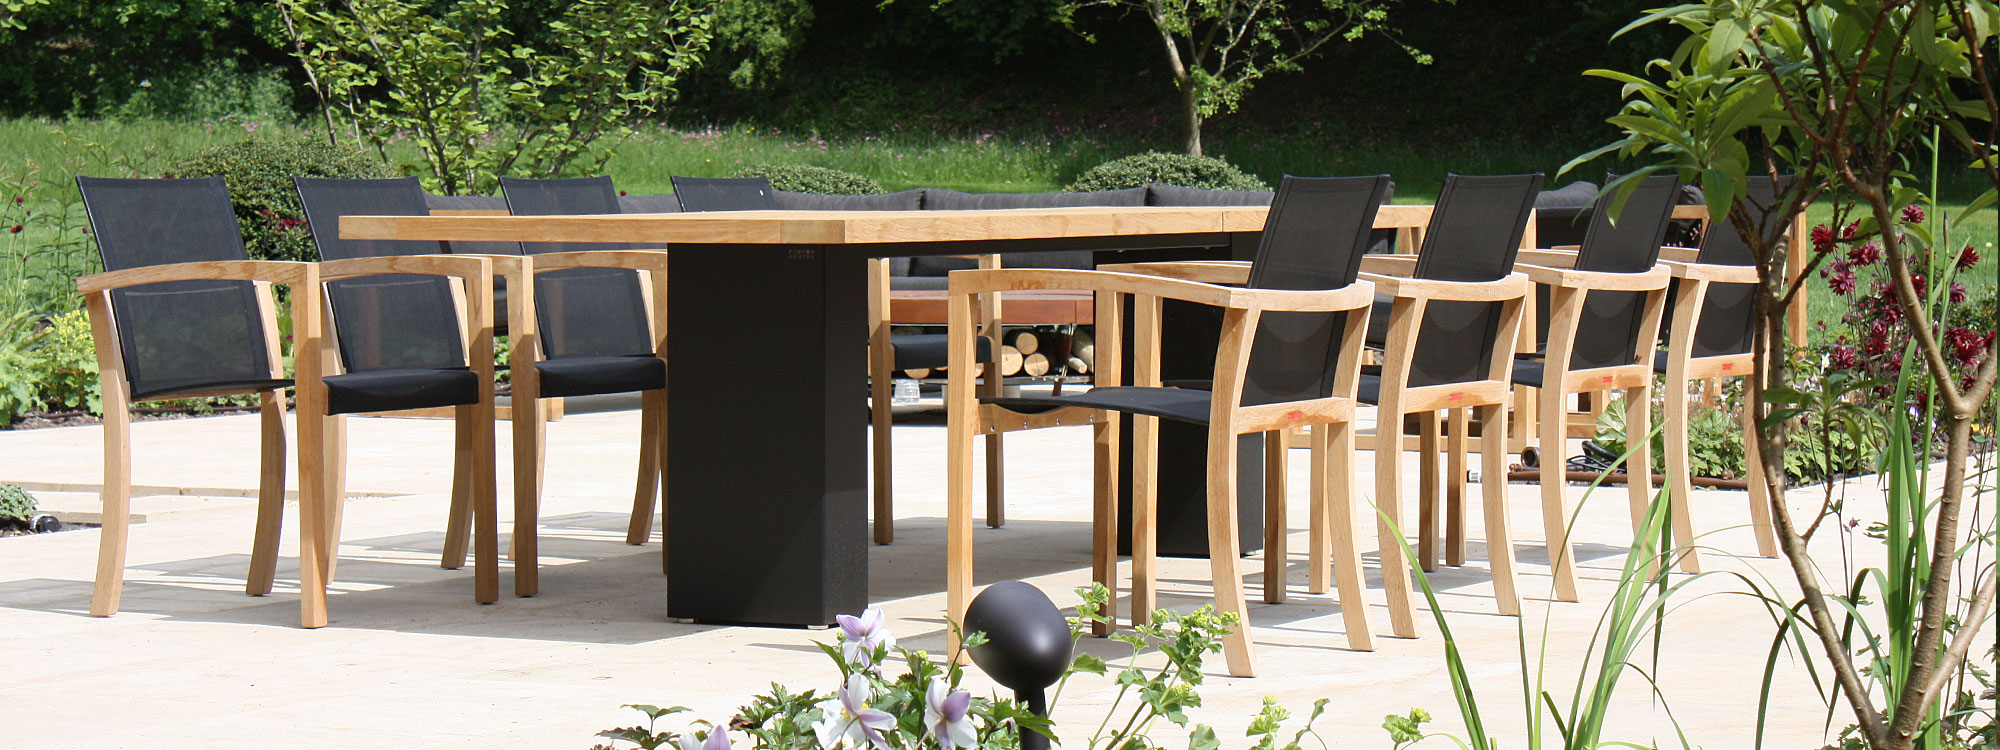 Image of Doble architectural garden table with black pedestal legs and teak top, together with XQI teak and Batyline garden chairs